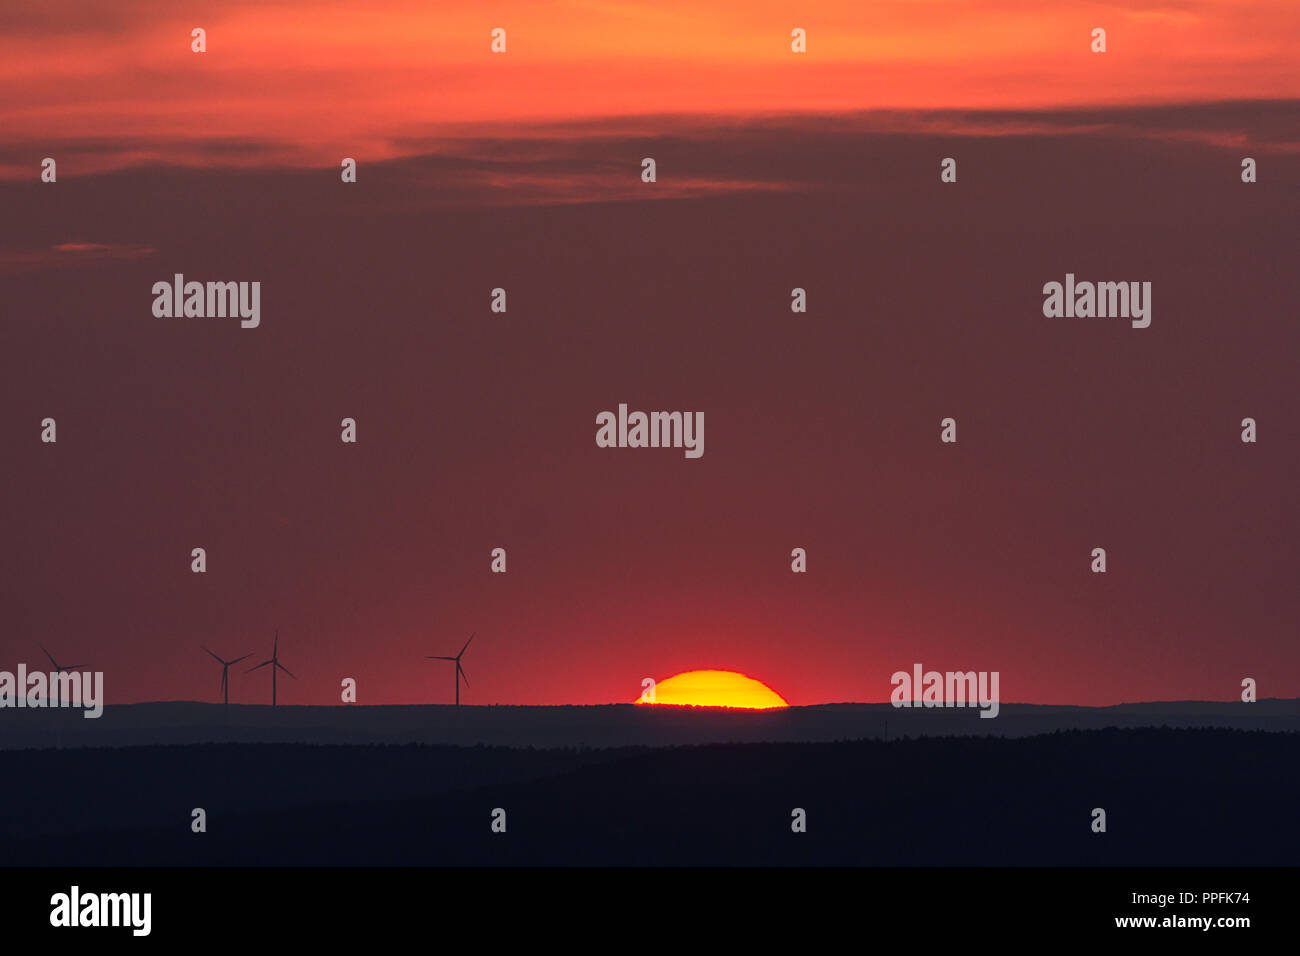 Glowing sun and silhouettes of wind turbines on the horizon, sunset, Bavaria, Germany Stock Photo